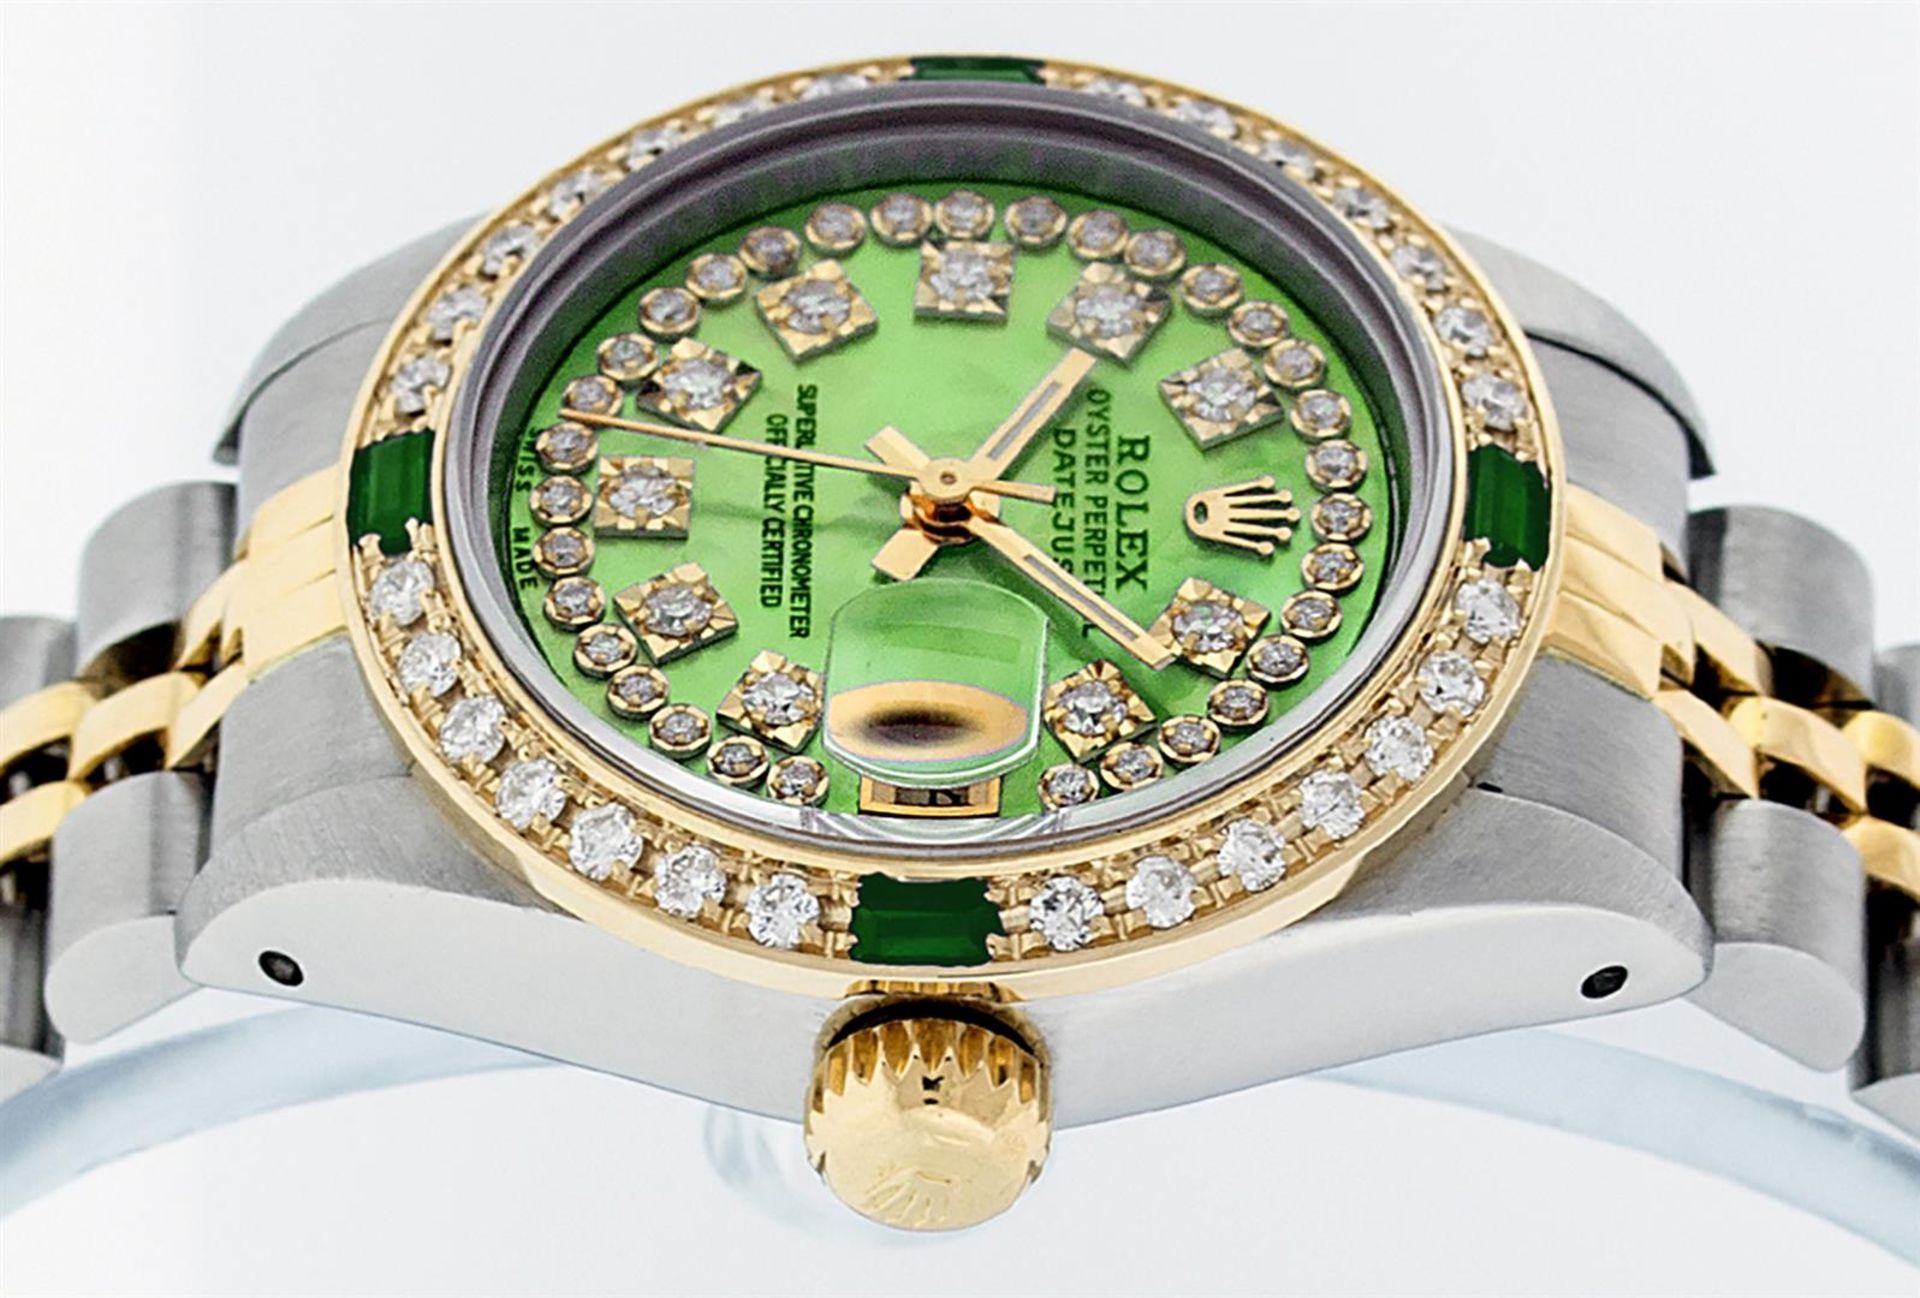 Rolex Ladies 26 Green String Diamond & Emerald Datejust Oyster Perpetual - Image 4 of 9